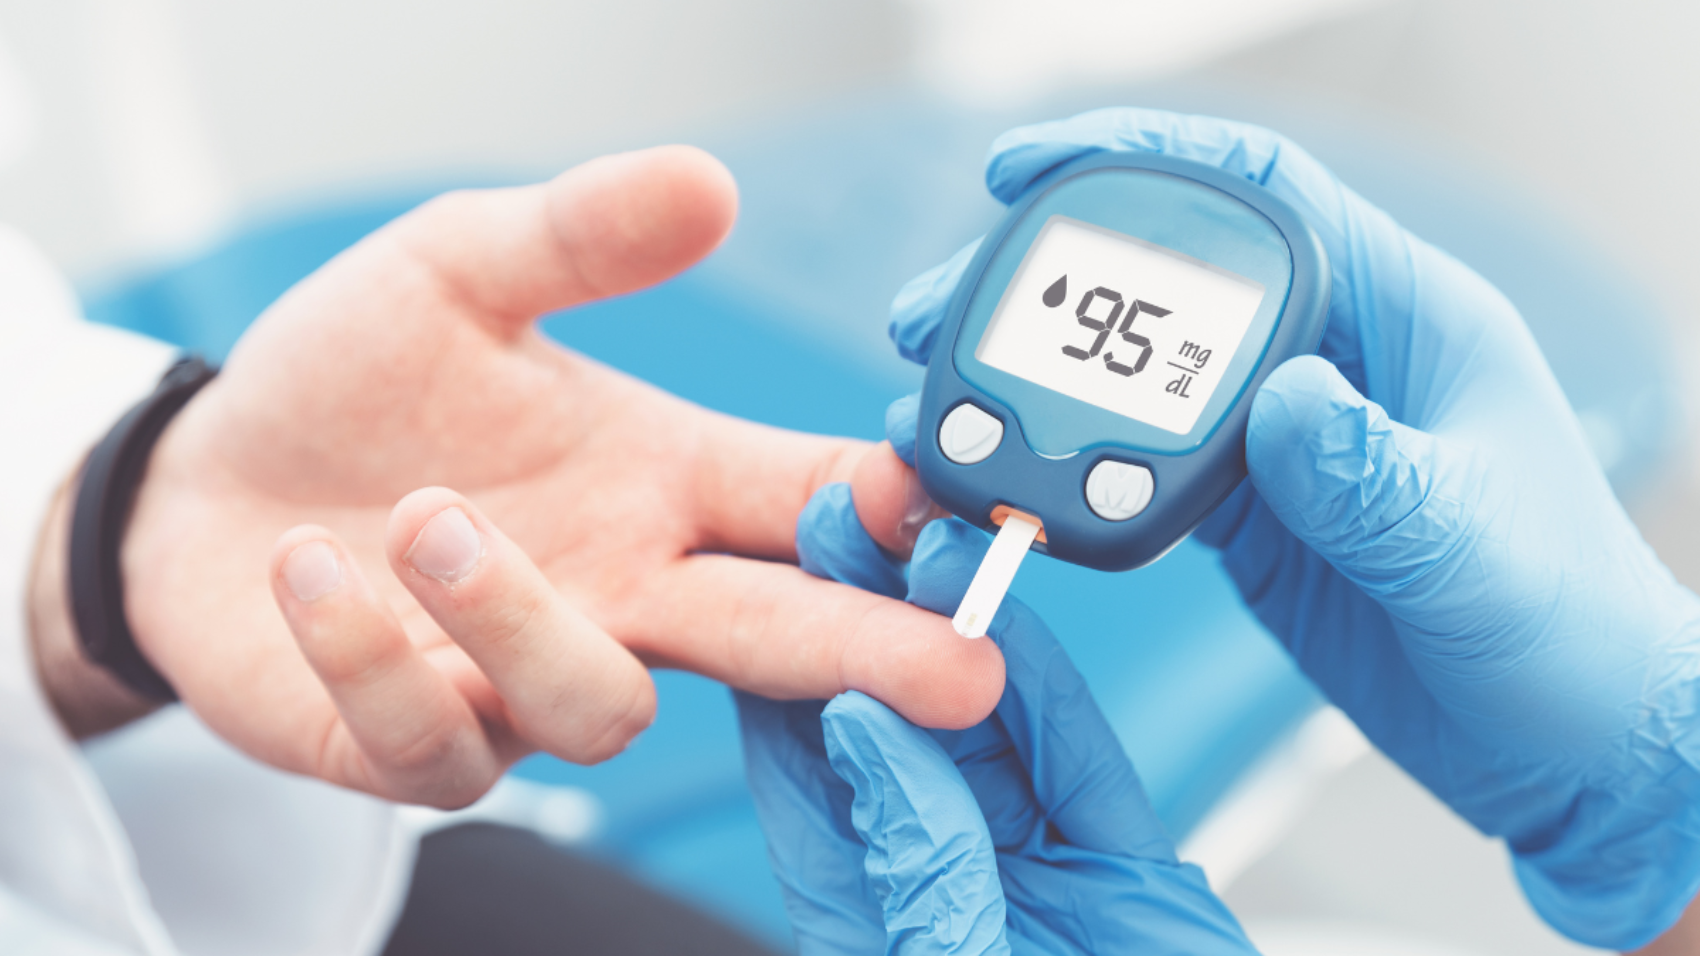 Person with diabetes checking blood sugar level